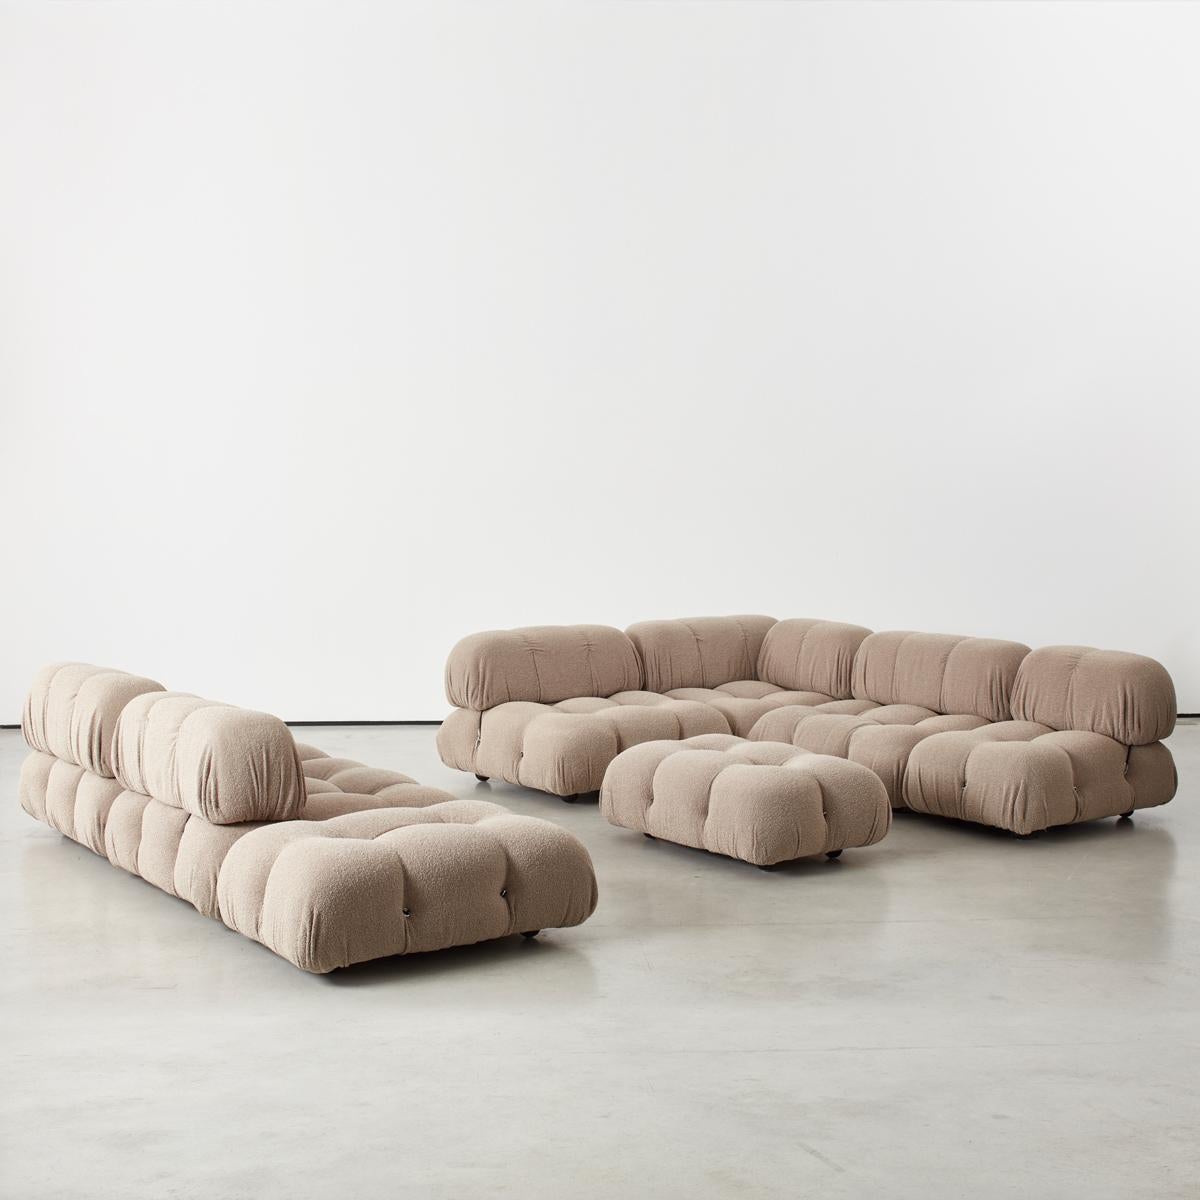 This modular sofa was designed by Mario Bellini in 1971 and was manufactured first by C&B and later by B&B Italia. The backs and armrests are provided with rings and carabineers, which allows the user to create the desired configuration best suited